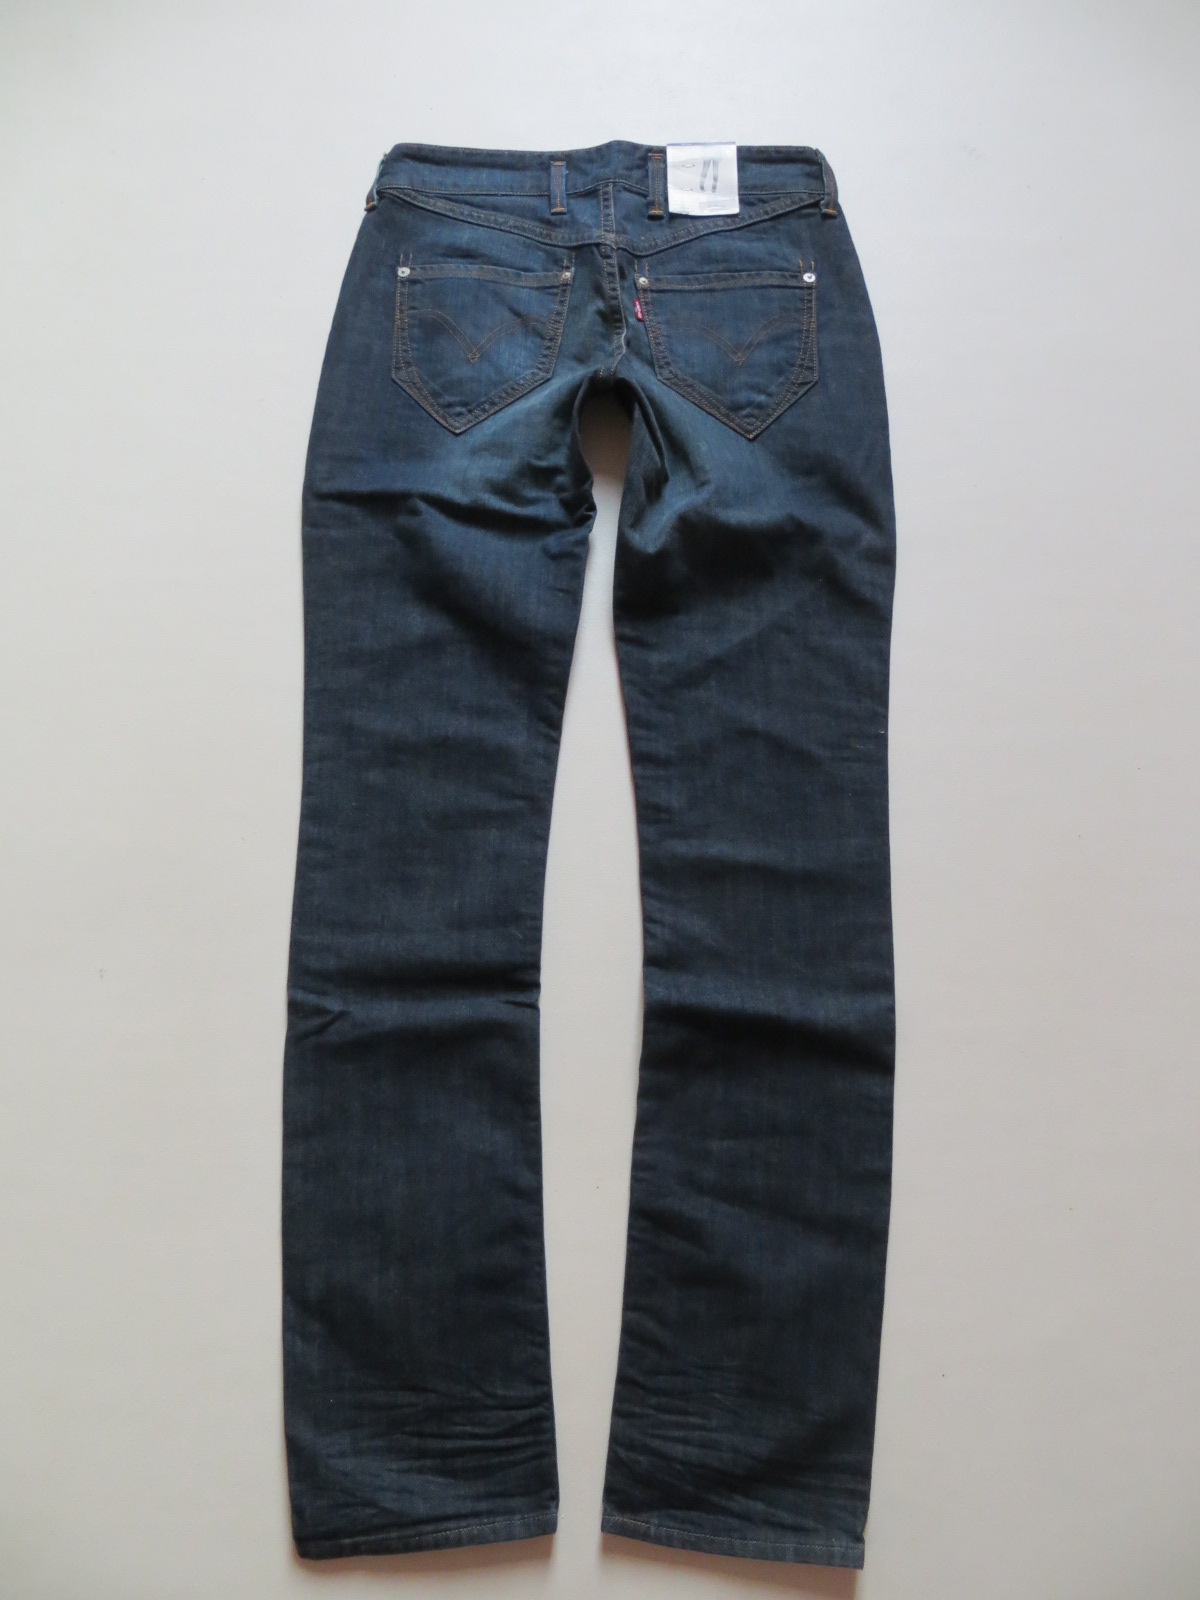 Levi's 571 Slim Fit Jeans Trousers, w 30/L 34, New! Special Edition ...